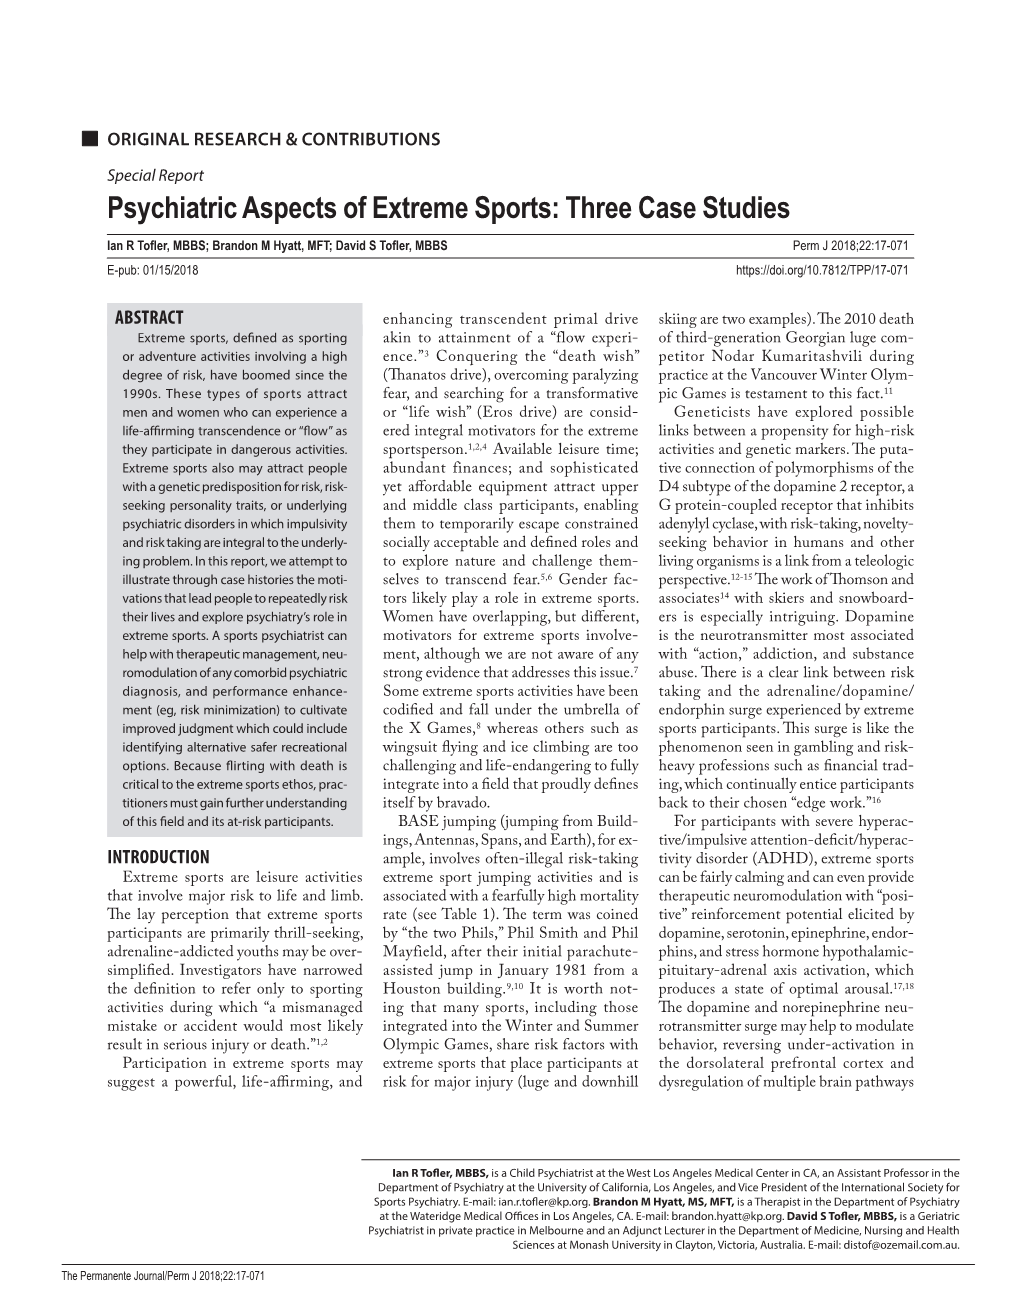 Psychiatric Aspects of Extreme Sports